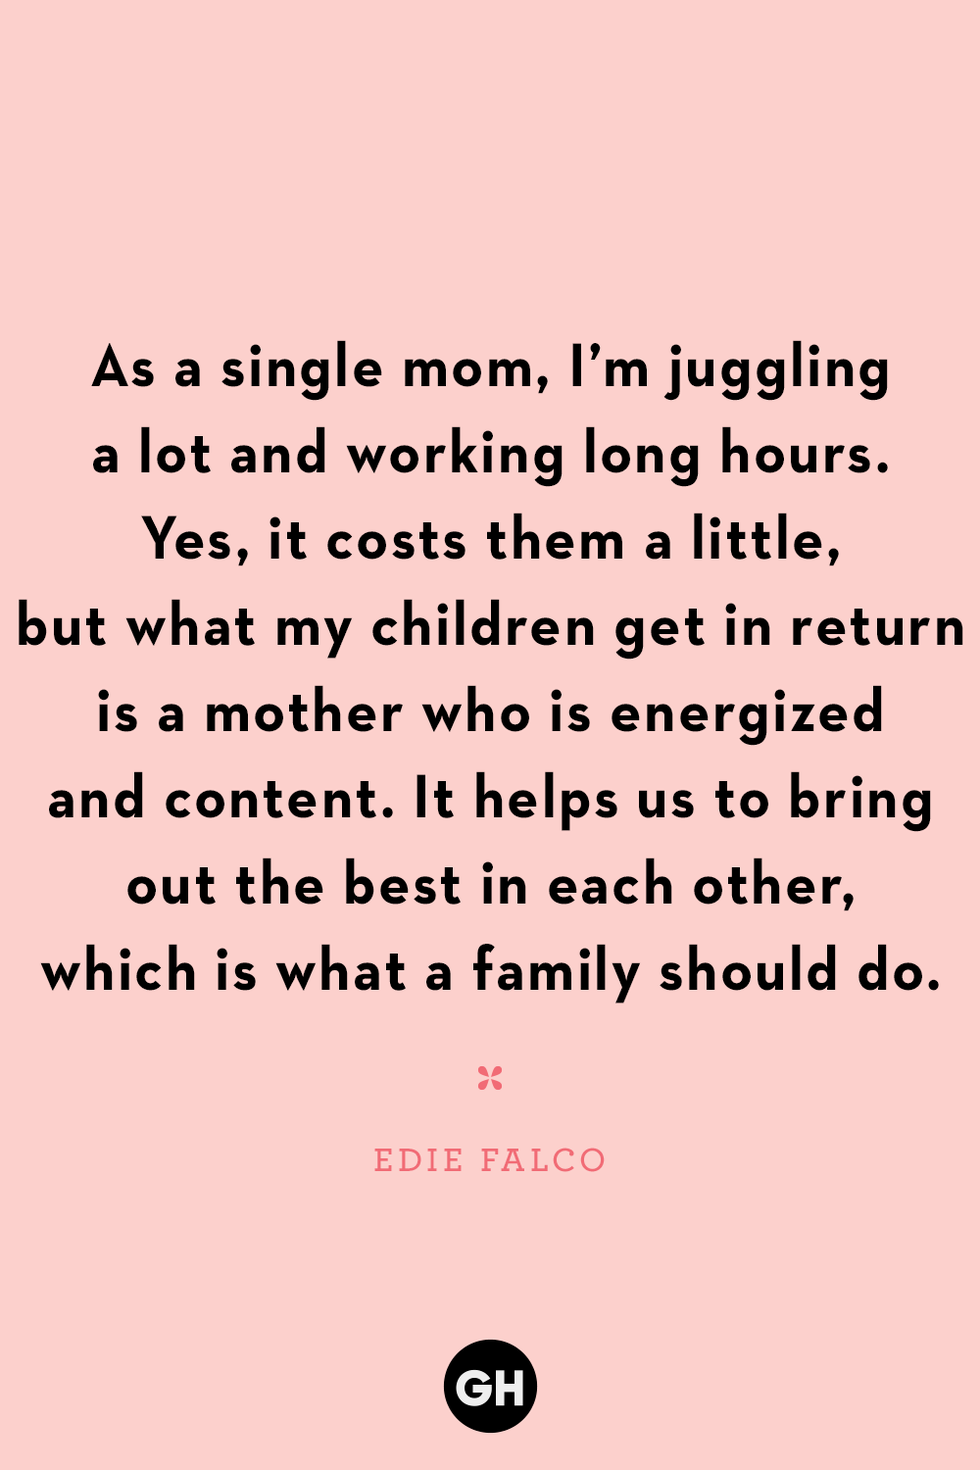 https://hips.hearstapps.com/hmg-prod/images/single-mom-quotes-edie-falco-1648216249.png?crop=1xw:1xh;center,top&resize=980:*